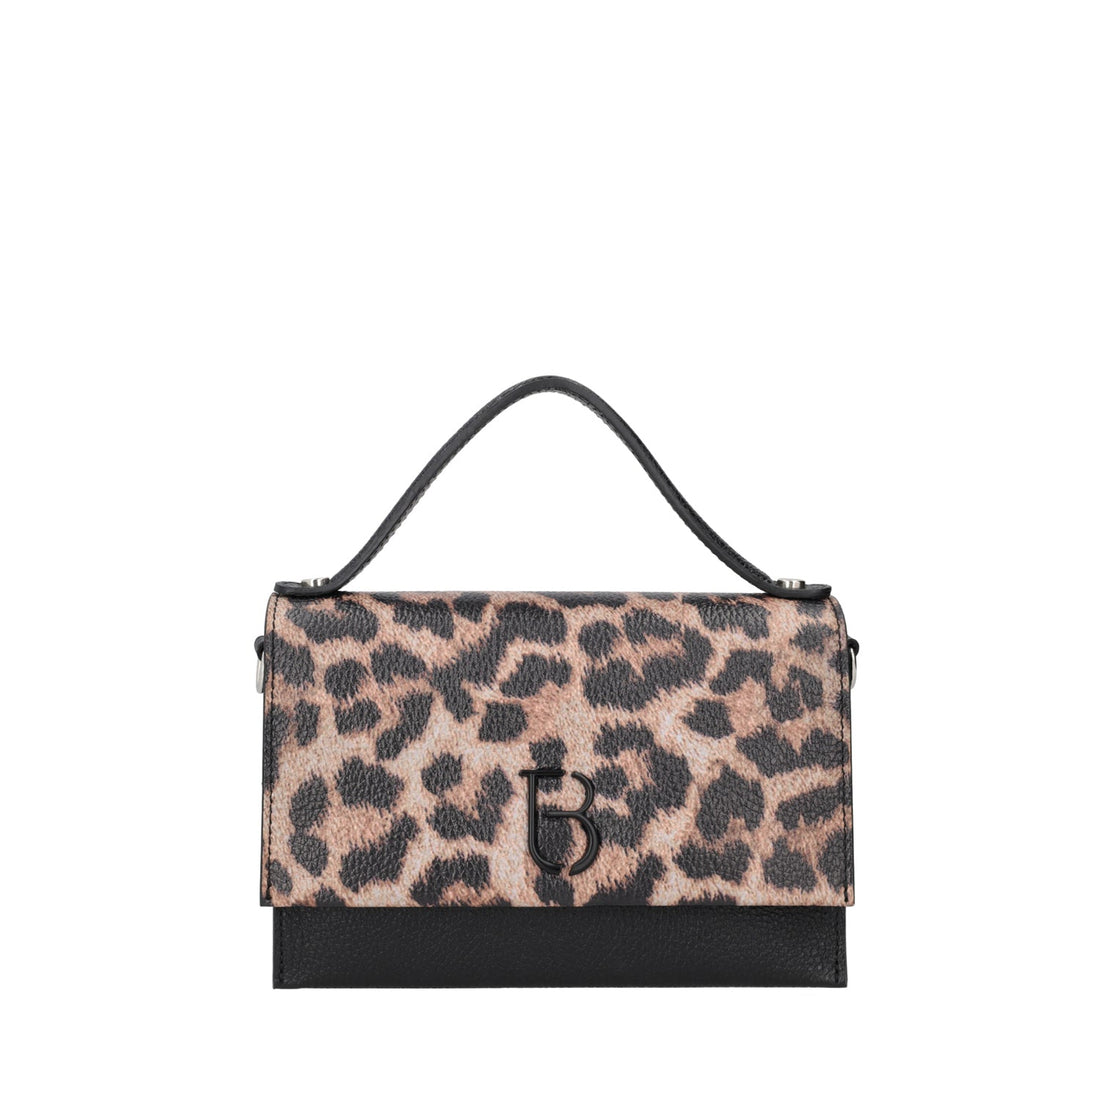 BLACK NARCISO HAND BAG WITH SPOTTED FLAP